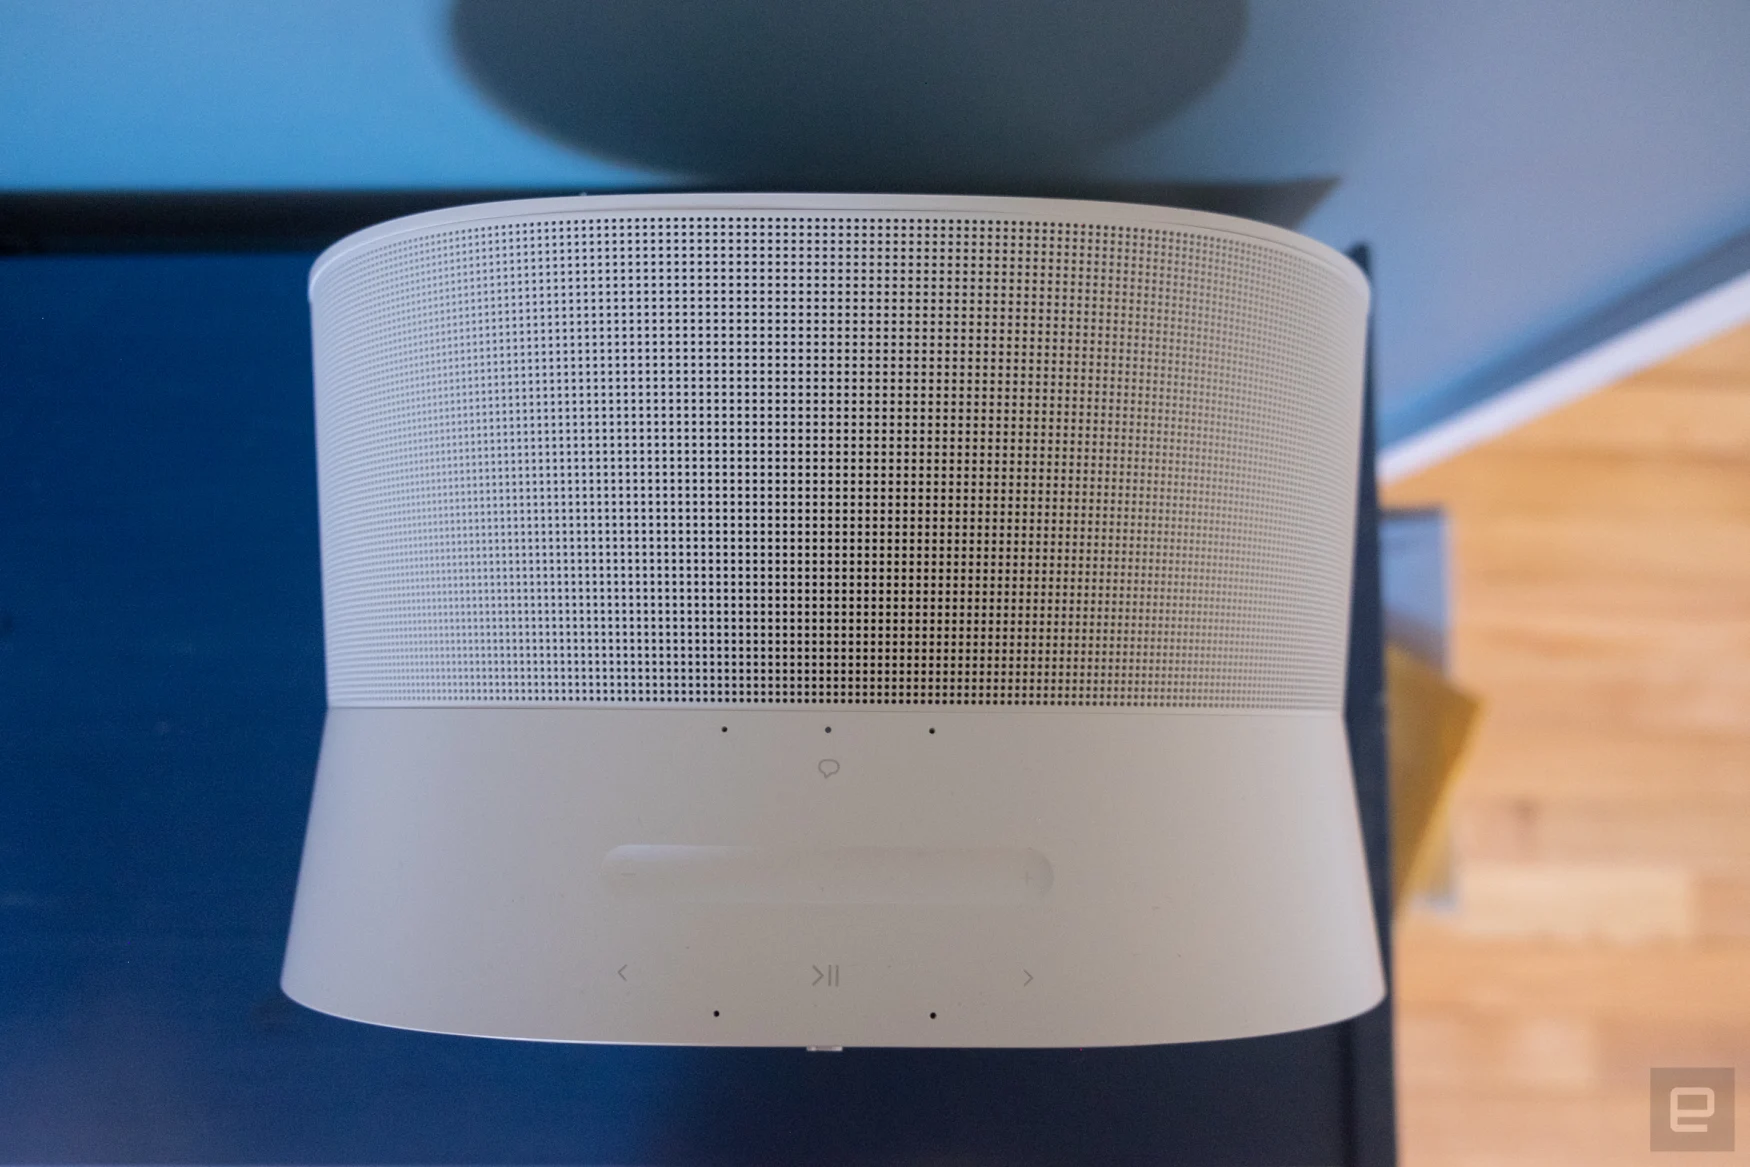 Photos of the new Sonos Era 300 speaker, which can play music in Dolby Atmos spatial audio.